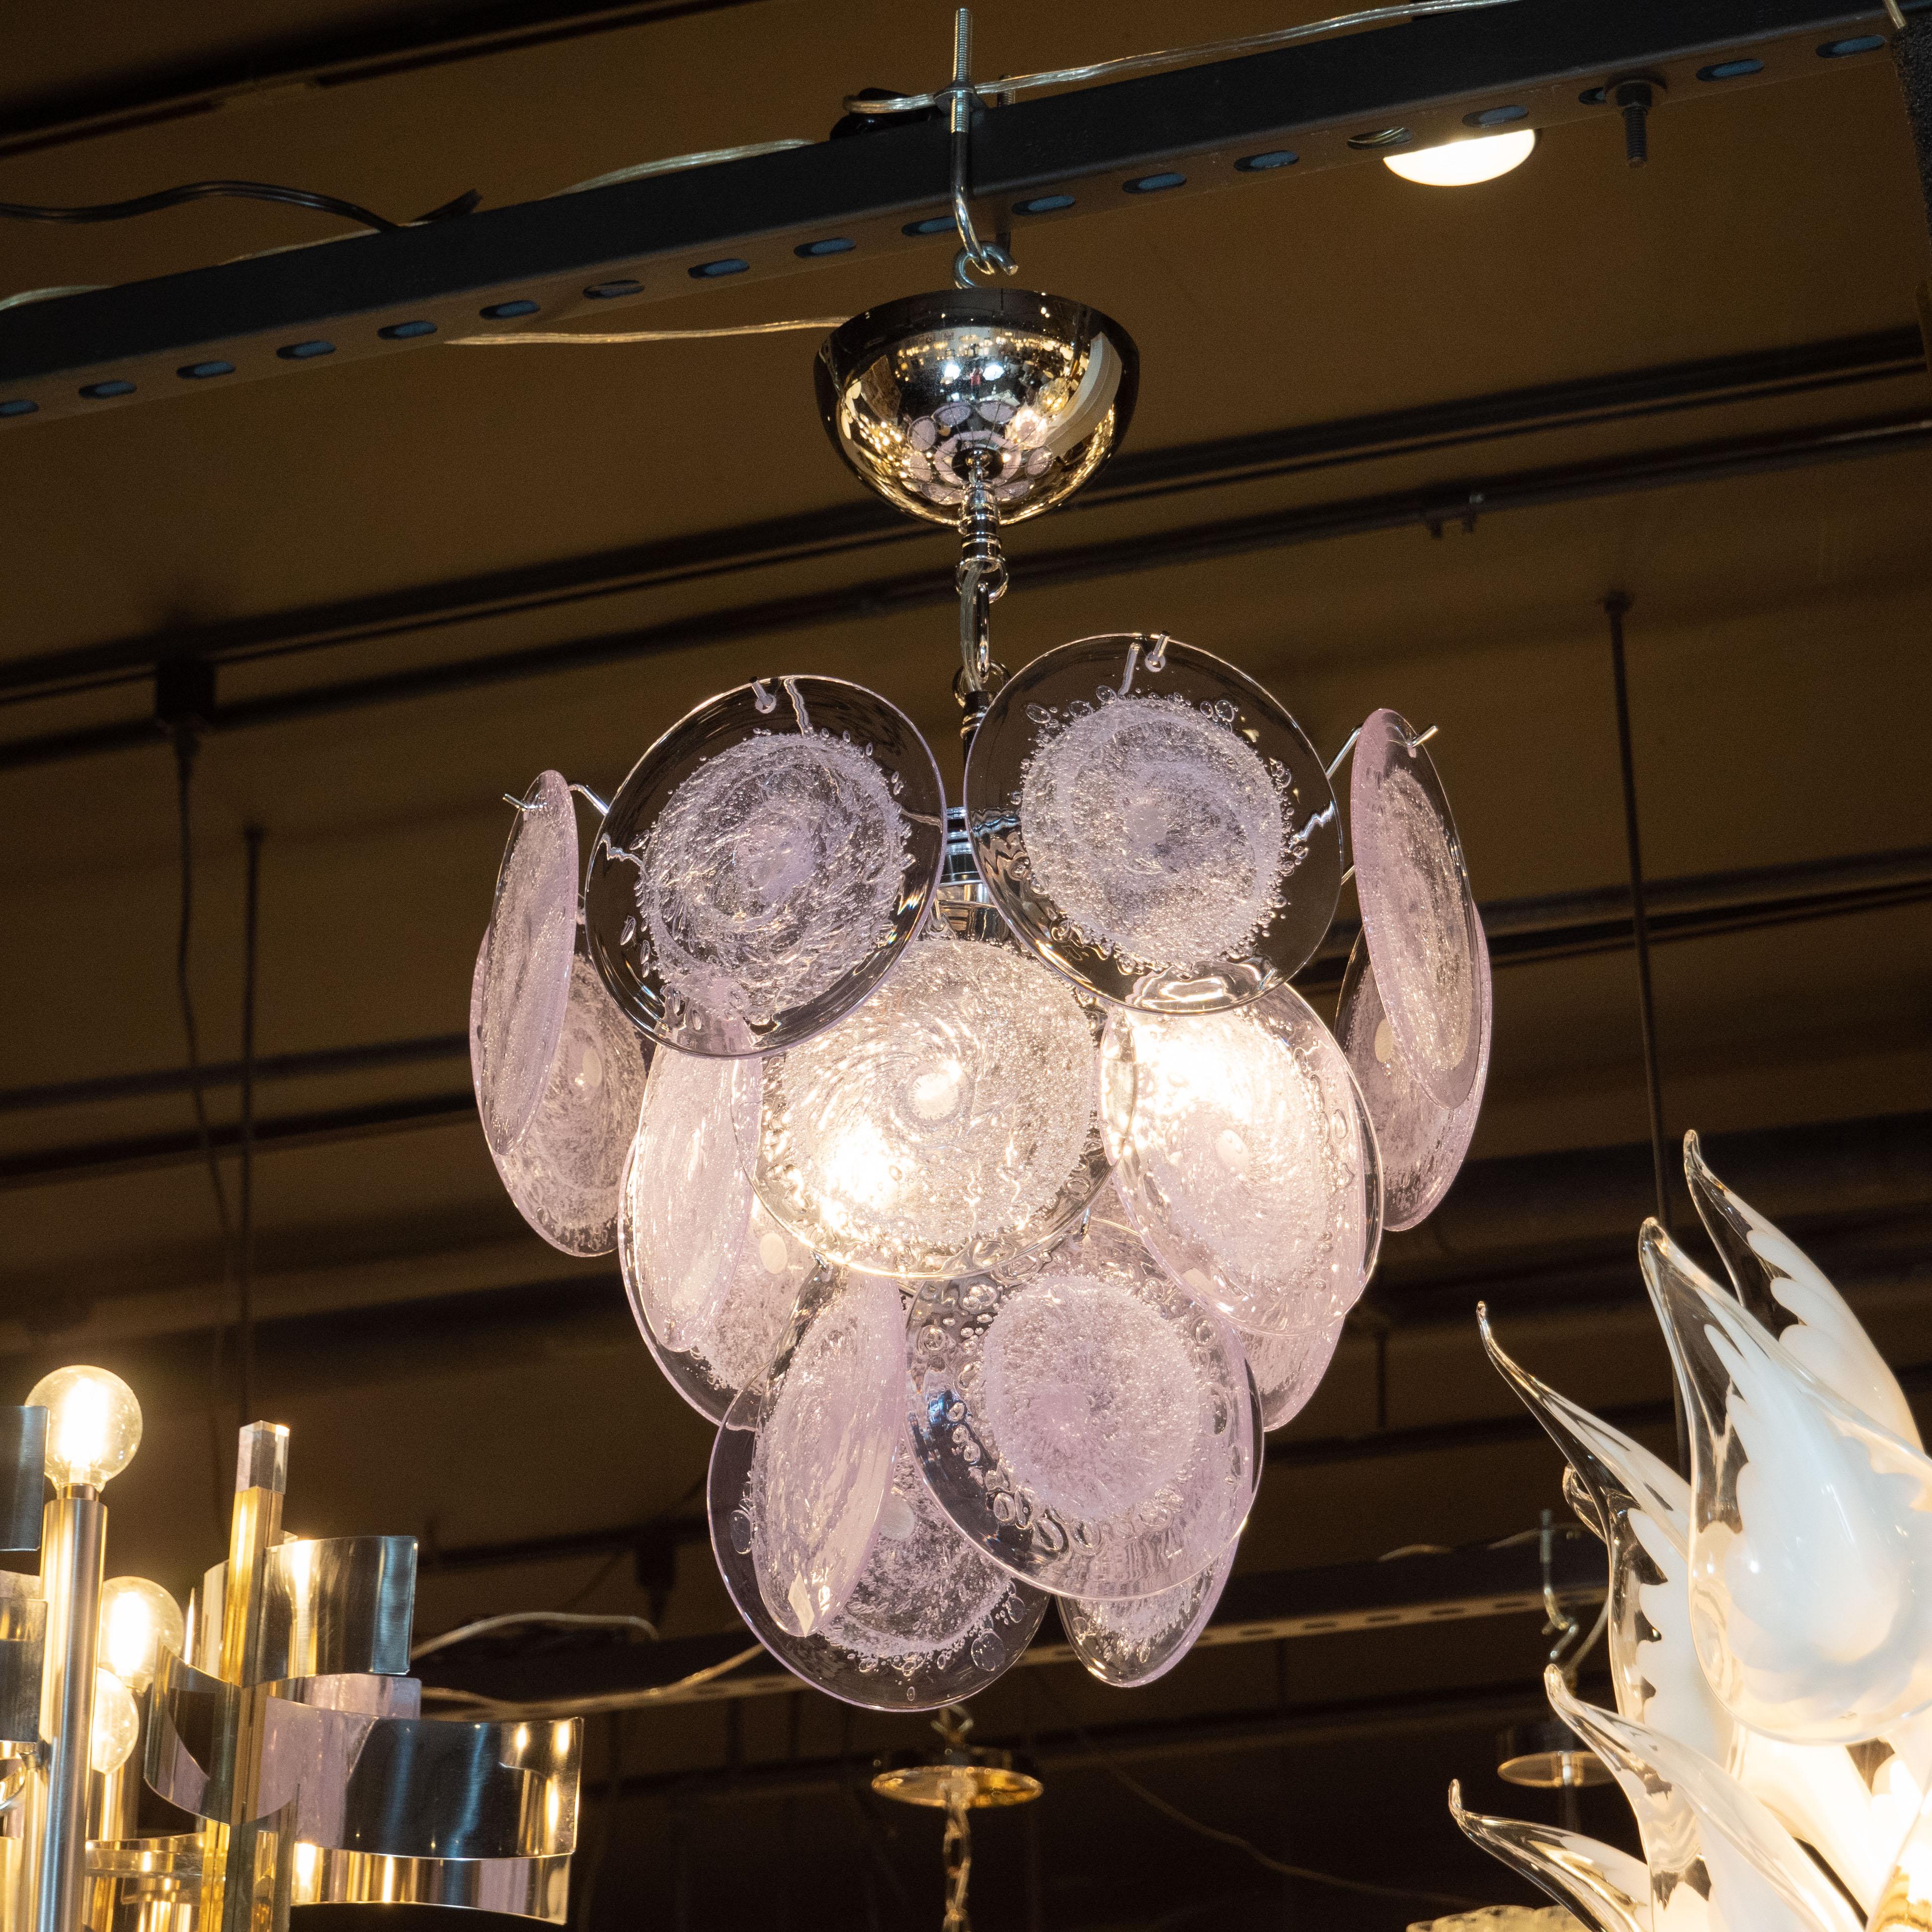 This chandelier has three descending tiers of translucent lavender discs, which are suspended from a polished chrome frame. Created in the manner of Vistosi, each disc is hand blown by artisans in Murano, Italy, the island off the coast of Venice